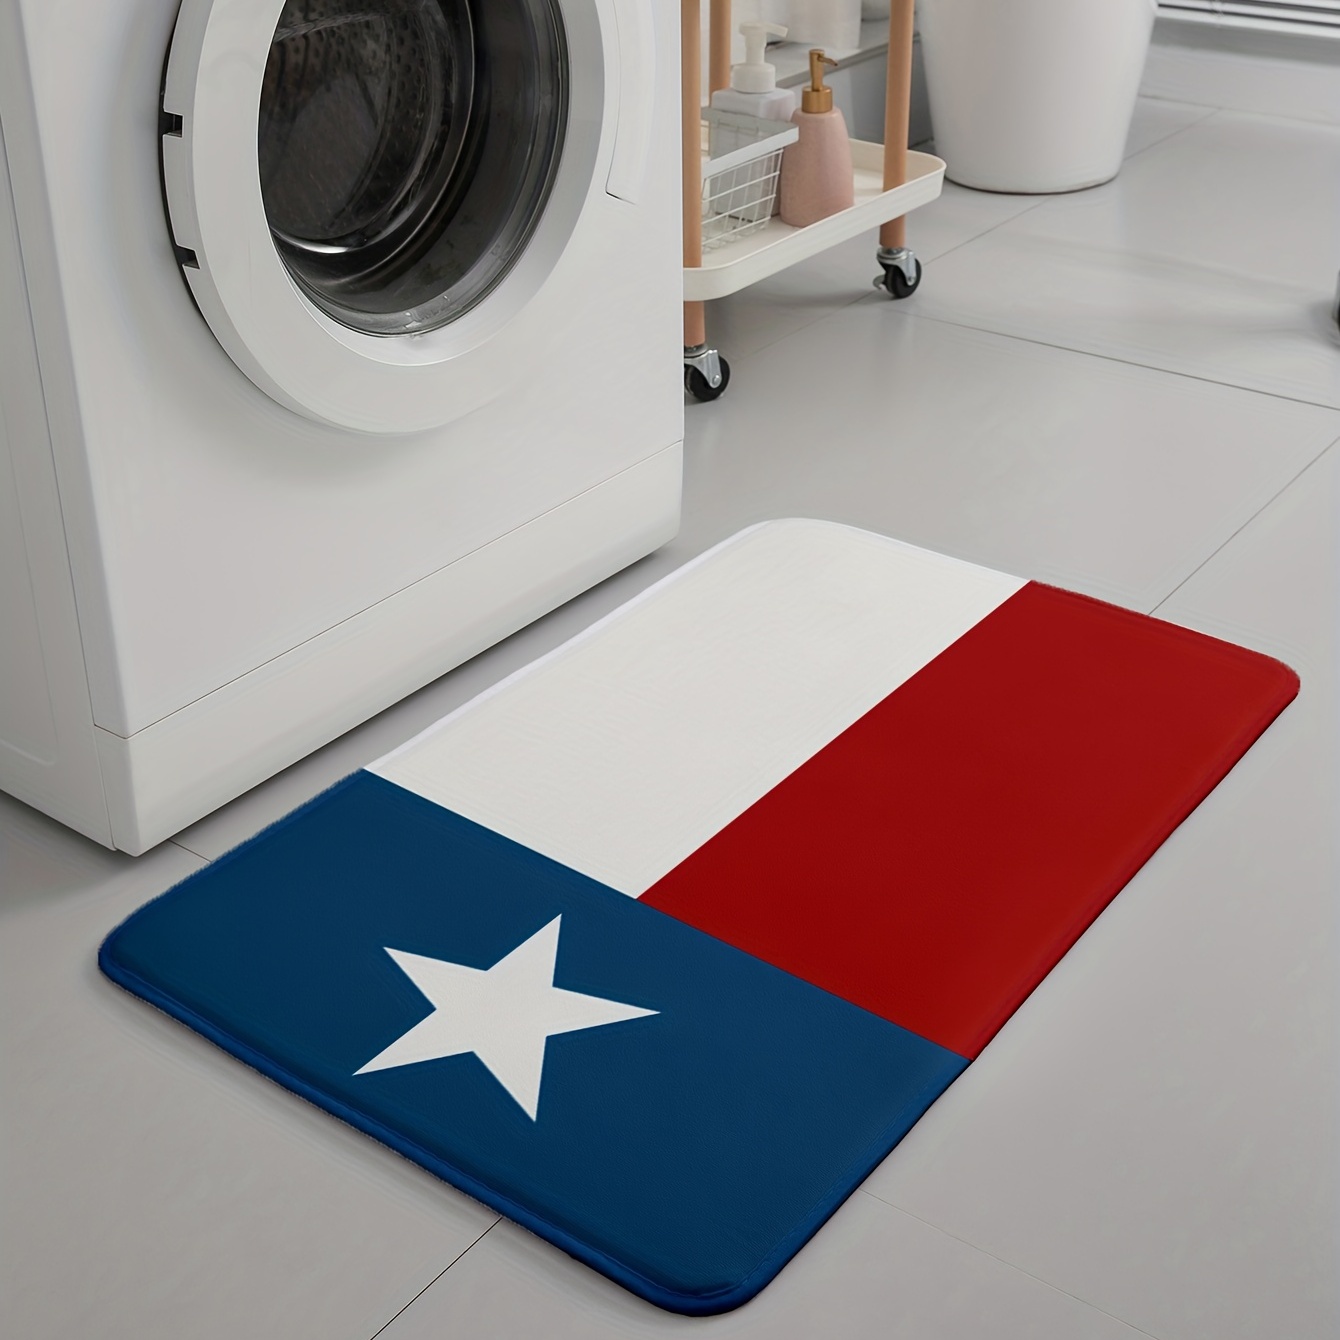 Automatic Floor Mat Washers at ALL Locations!